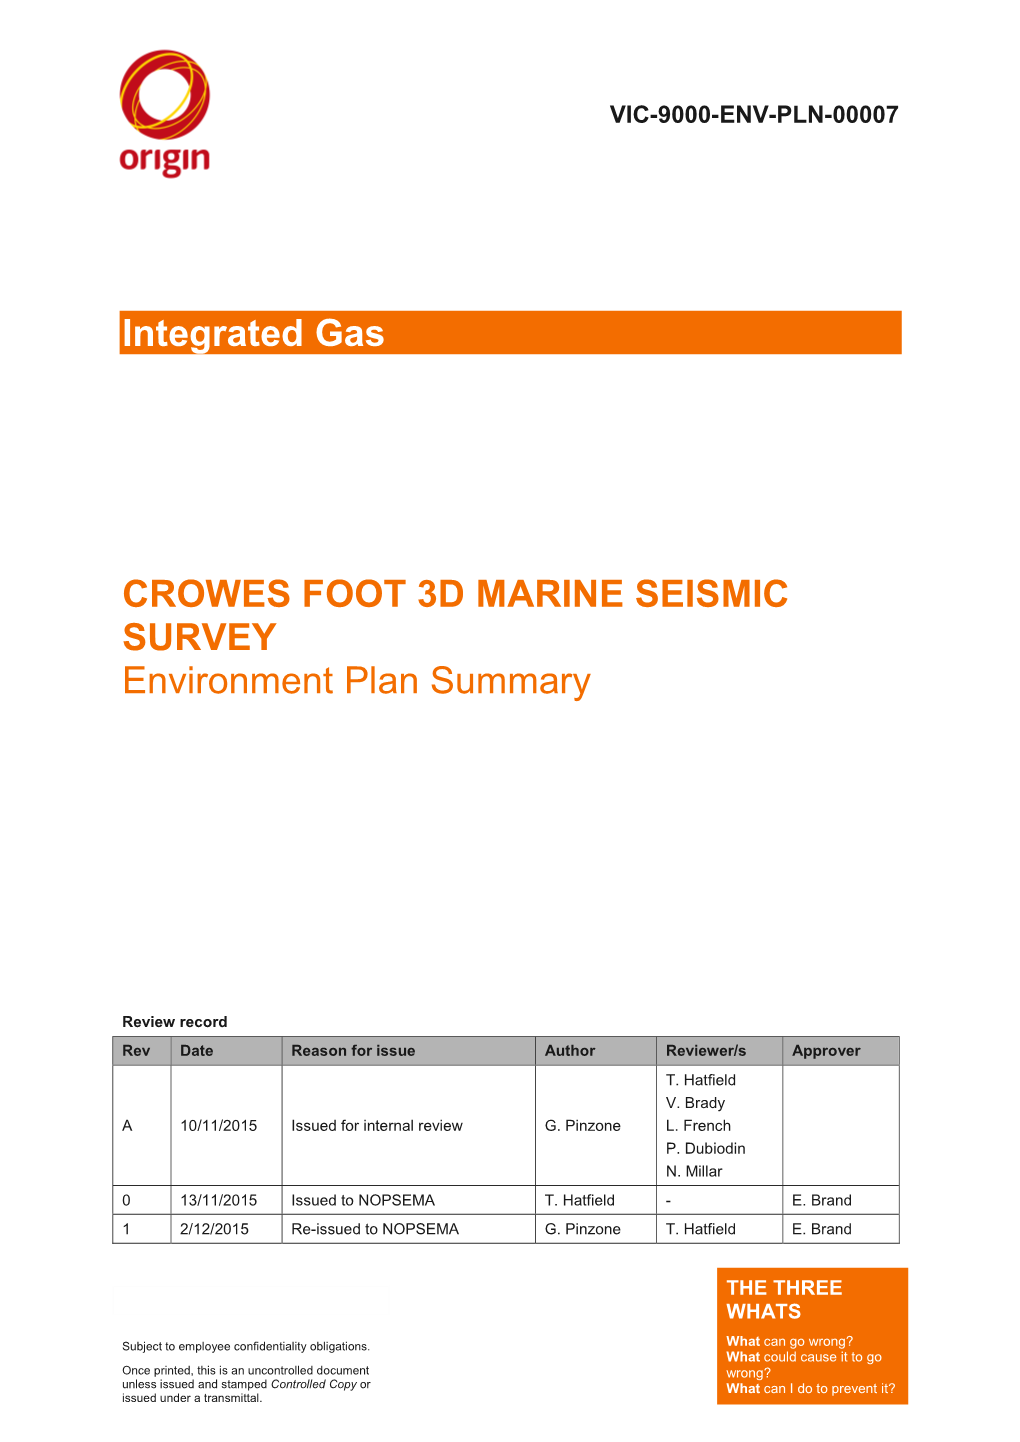 Integrated Gas CROWES FOOT 3D MARINE SEISMIC SURVEY